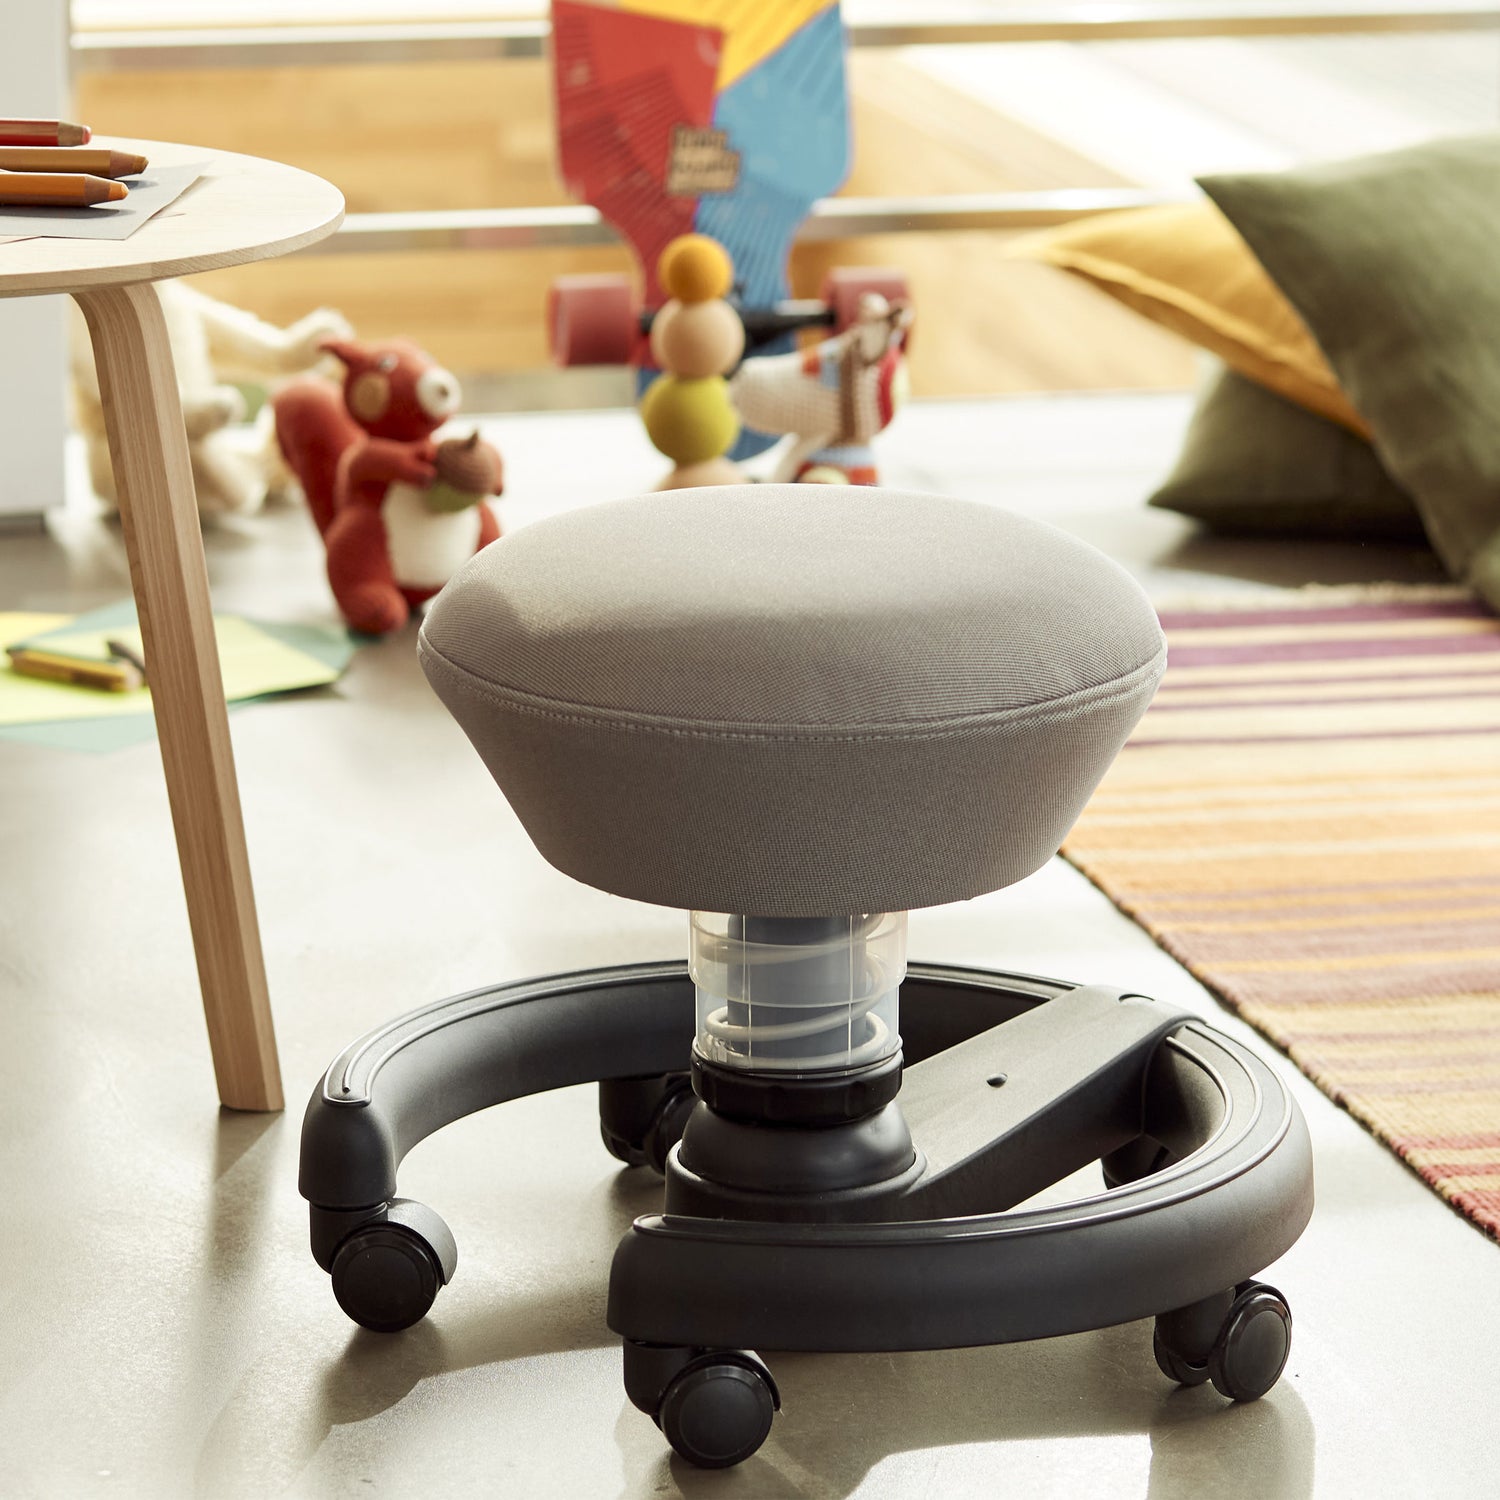 Children's desk chair Swoppster in gray with wheels